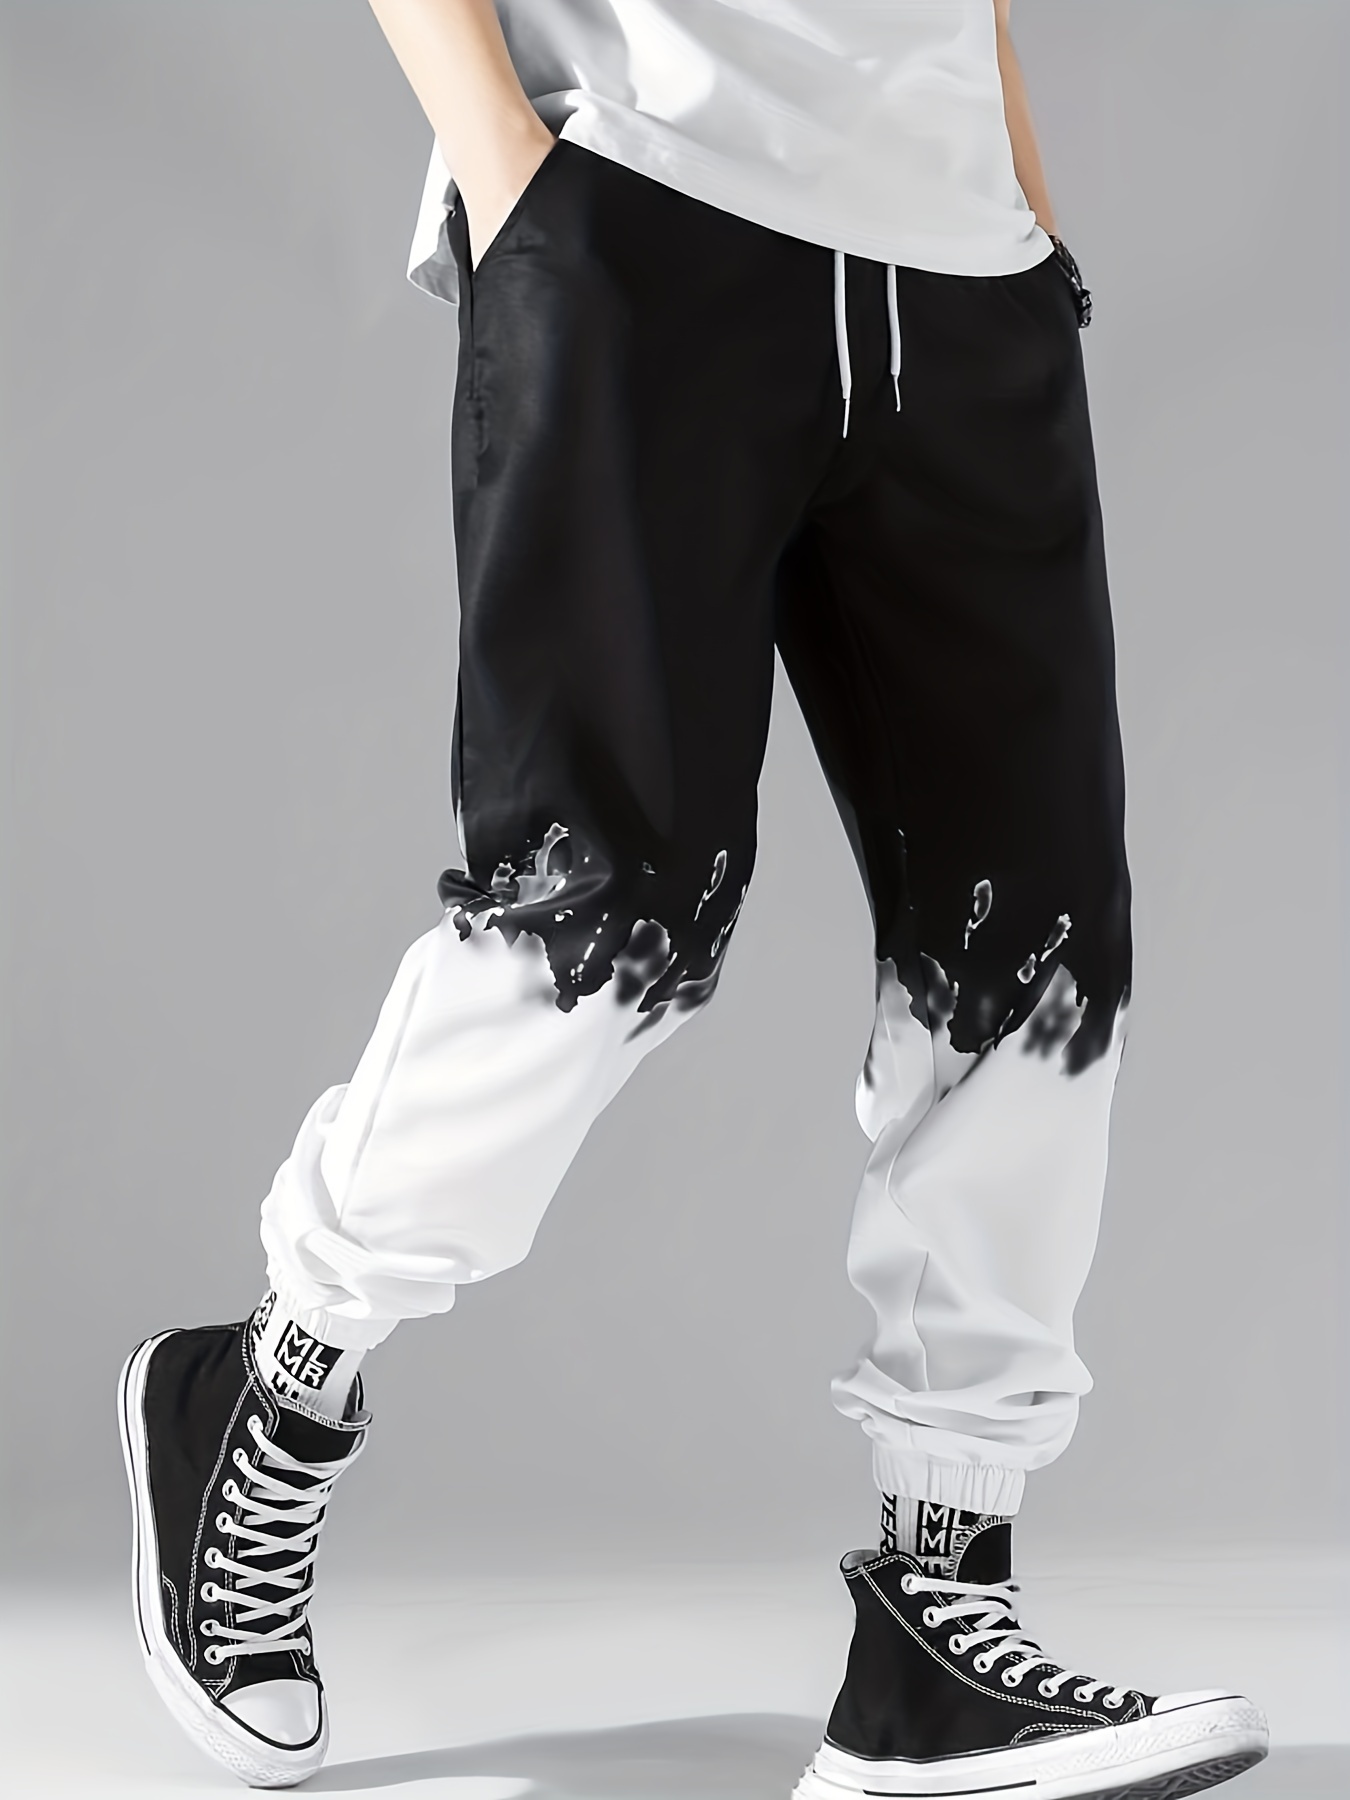 Patterned Pants Black And White Womens | ShopStyle